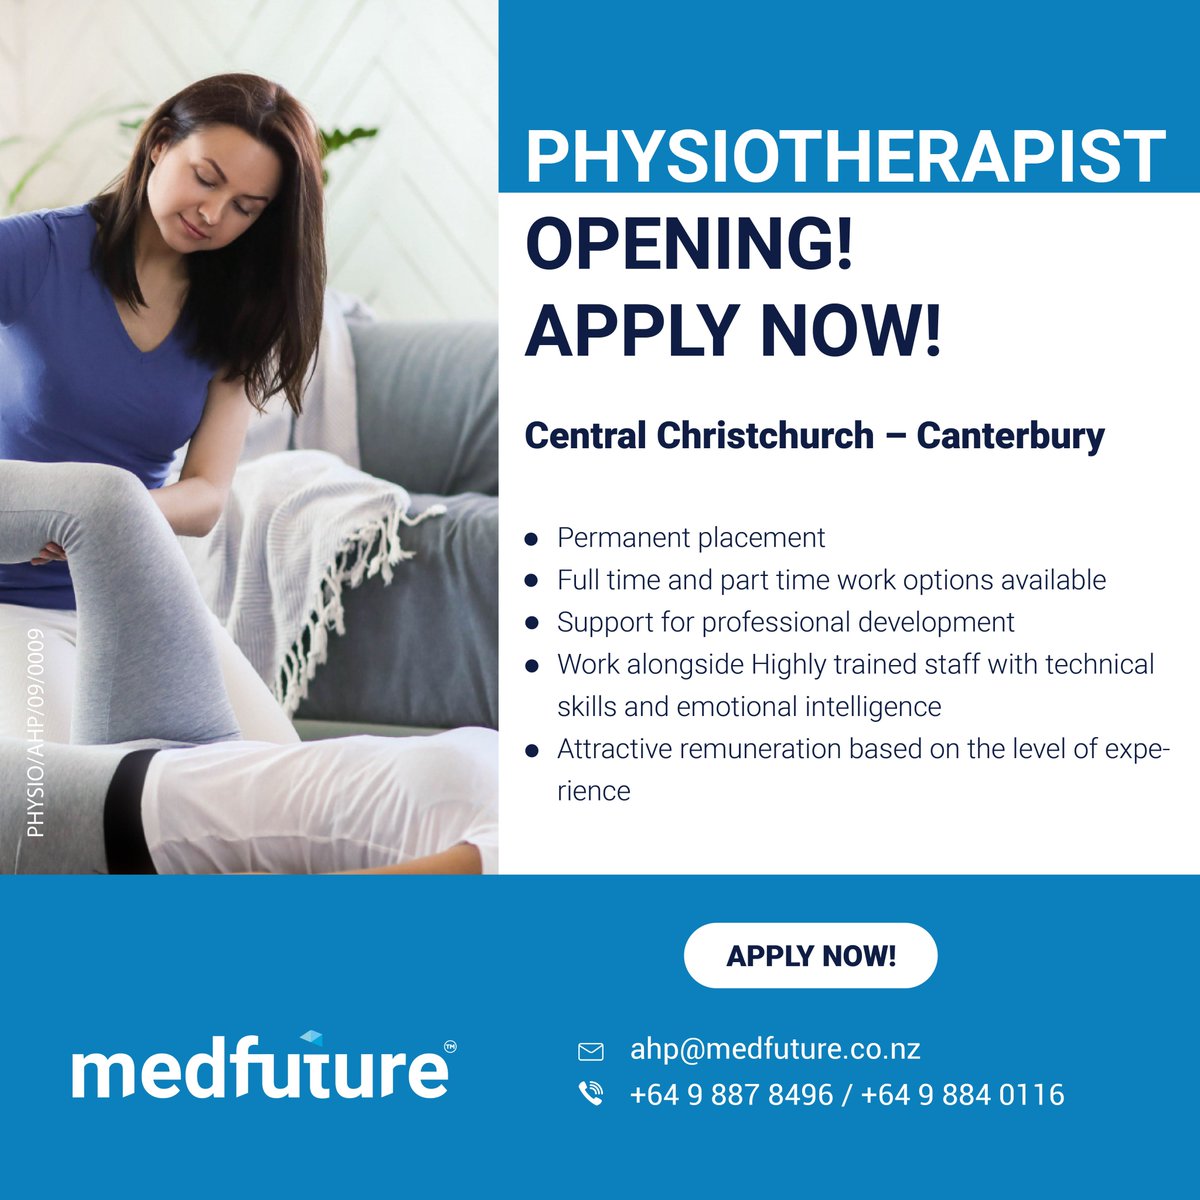 #Physiotherapy vacancies are available in #Canterbury. Discover the latest medical and healthcare professional job vacancies found in Australia and New Zealand when you subscribe with Medfuture.

Search Link - medfuture.com.au/job/permanent

#PhysioVacancy #PhysioJobs #CanterburyJobs